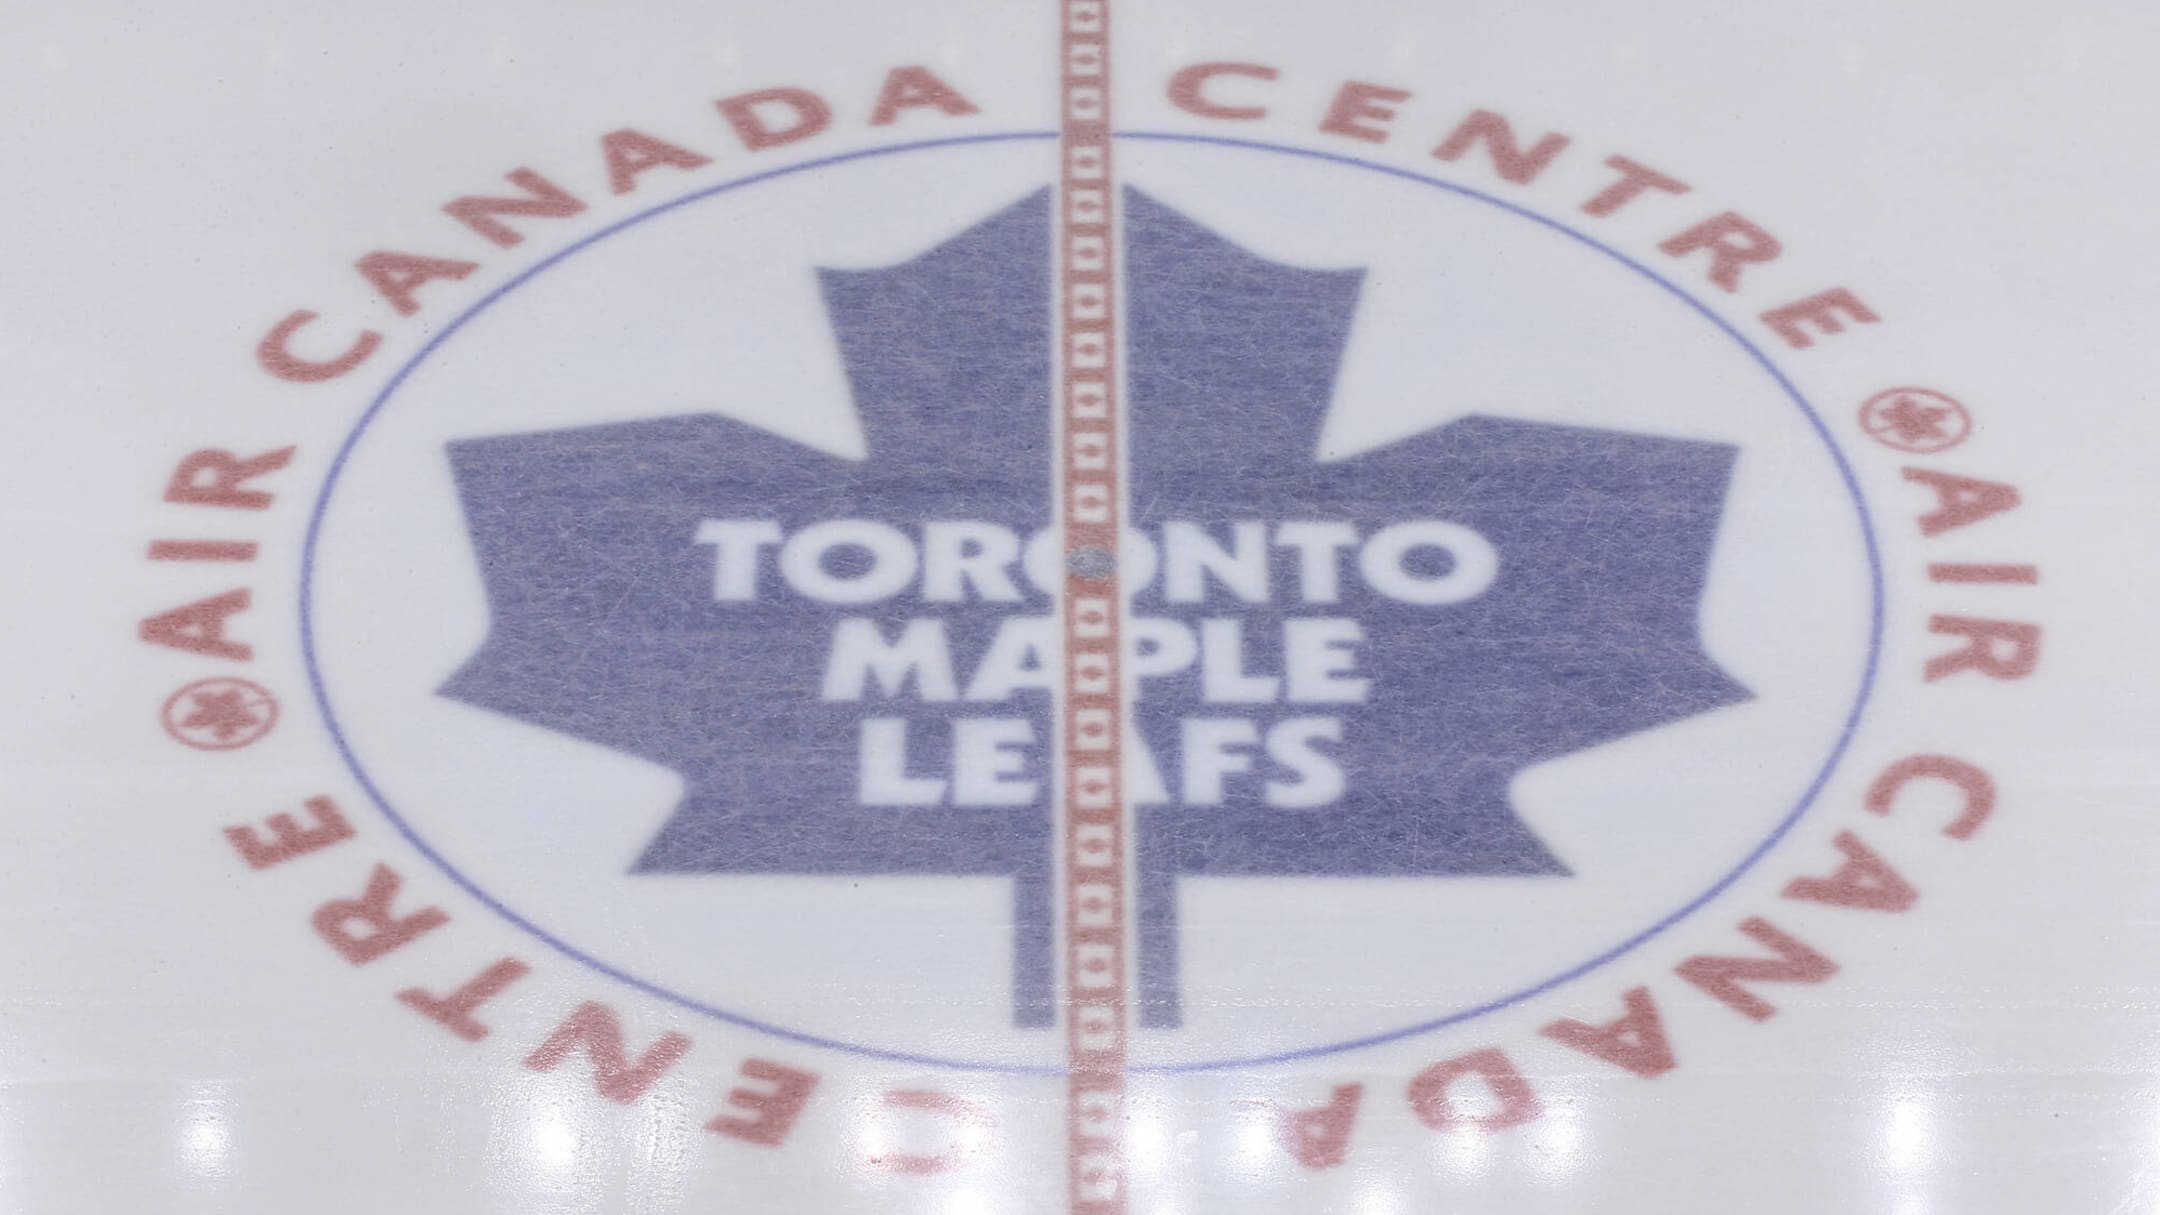 TORONTO MAPLE LEAFS PARTNER WITH DAIRY FARMERS OF ONTARIO